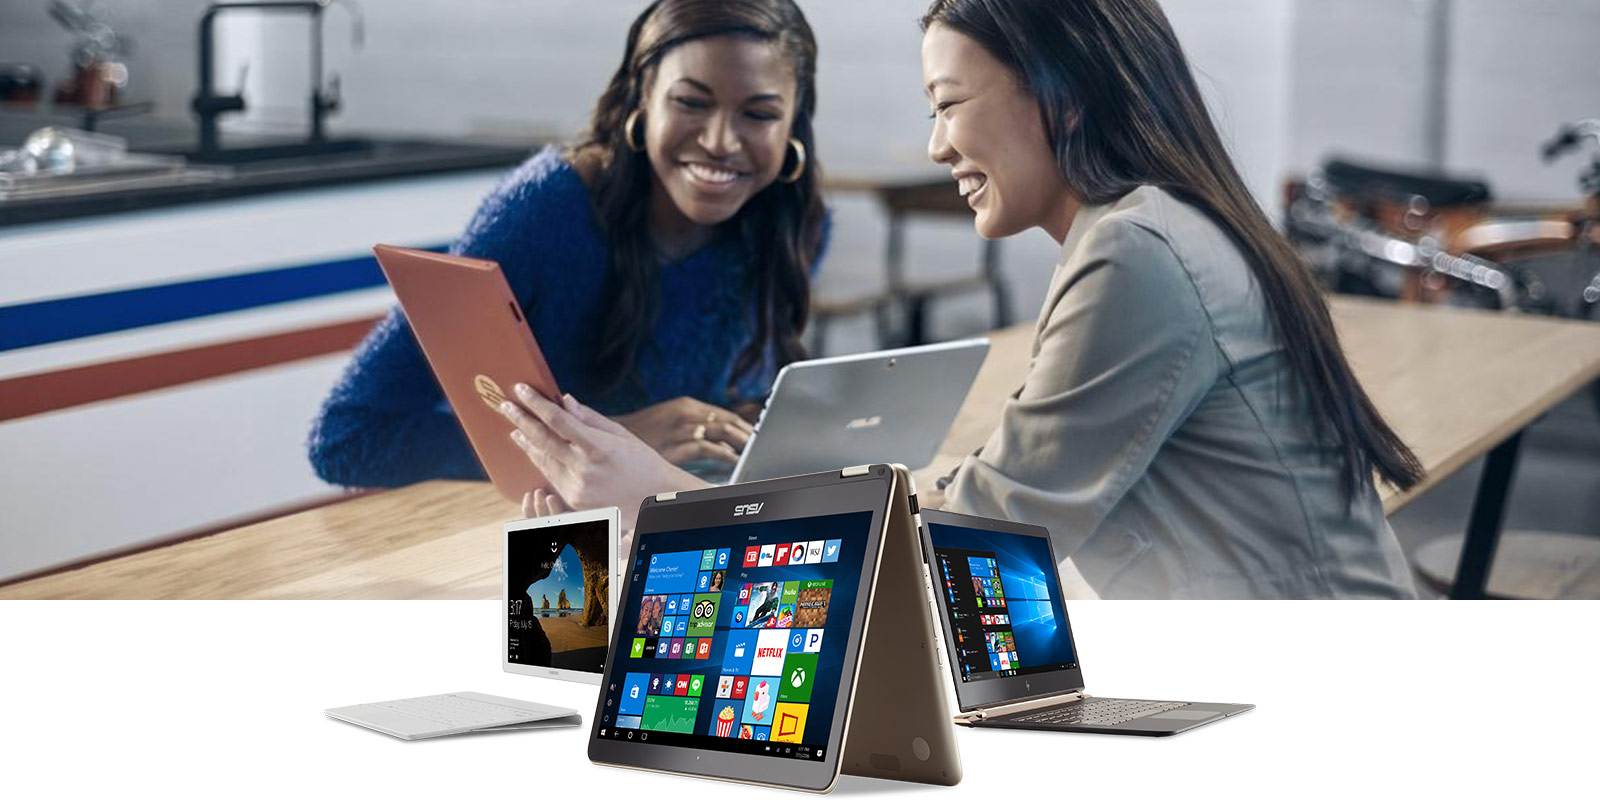 Several types of Windows 10 devices in dynamic formation with an image of two women sitting at a table looking at a tablet screen behind them